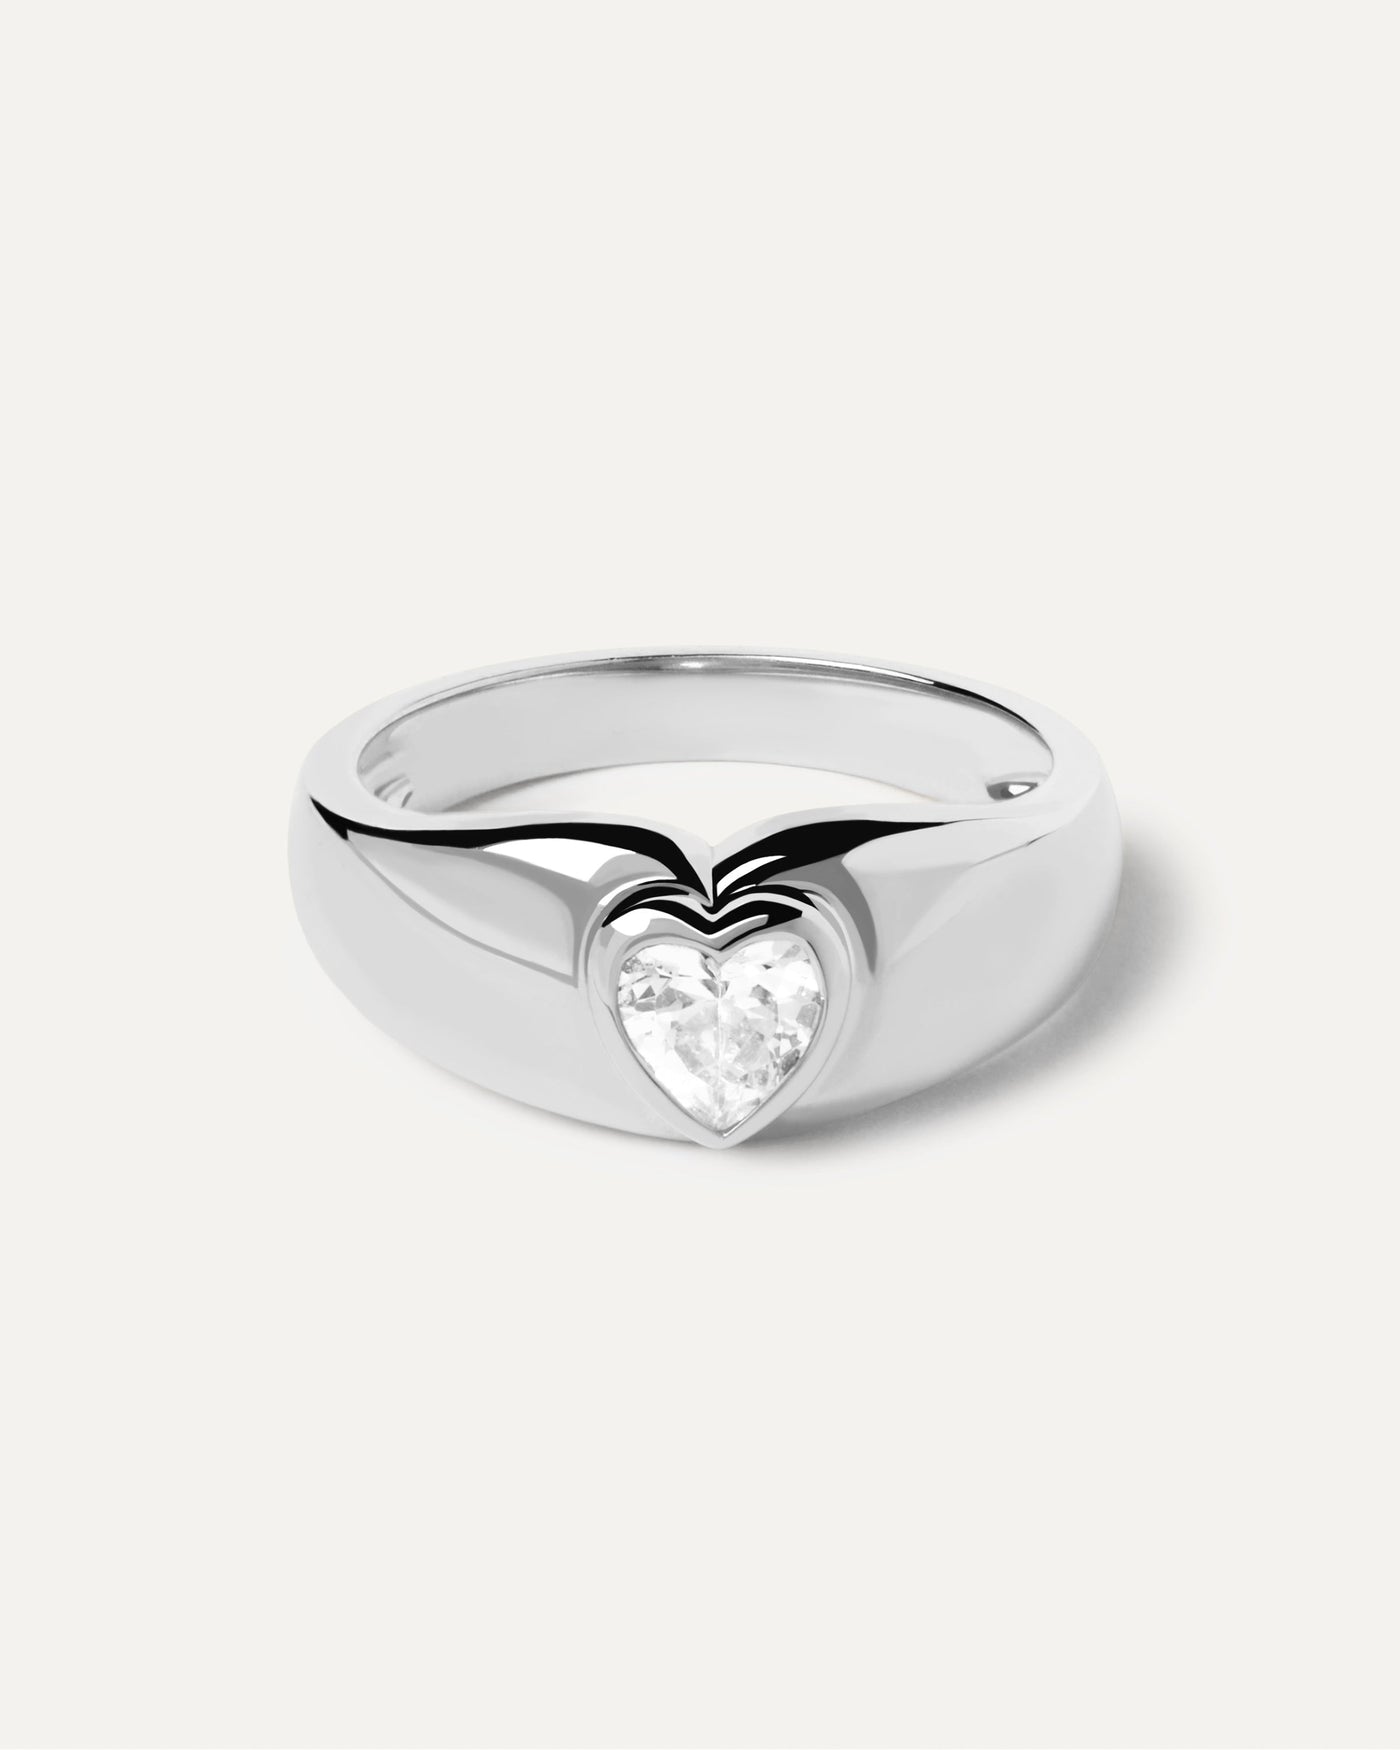 2023 Selection | Bright Heart Silver Ring. Bold ring in sterling silver with heart-shaped zirconia. Get the latest arrival from PDPAOLA. Place your order safely and get this Best Seller. Free Shipping.